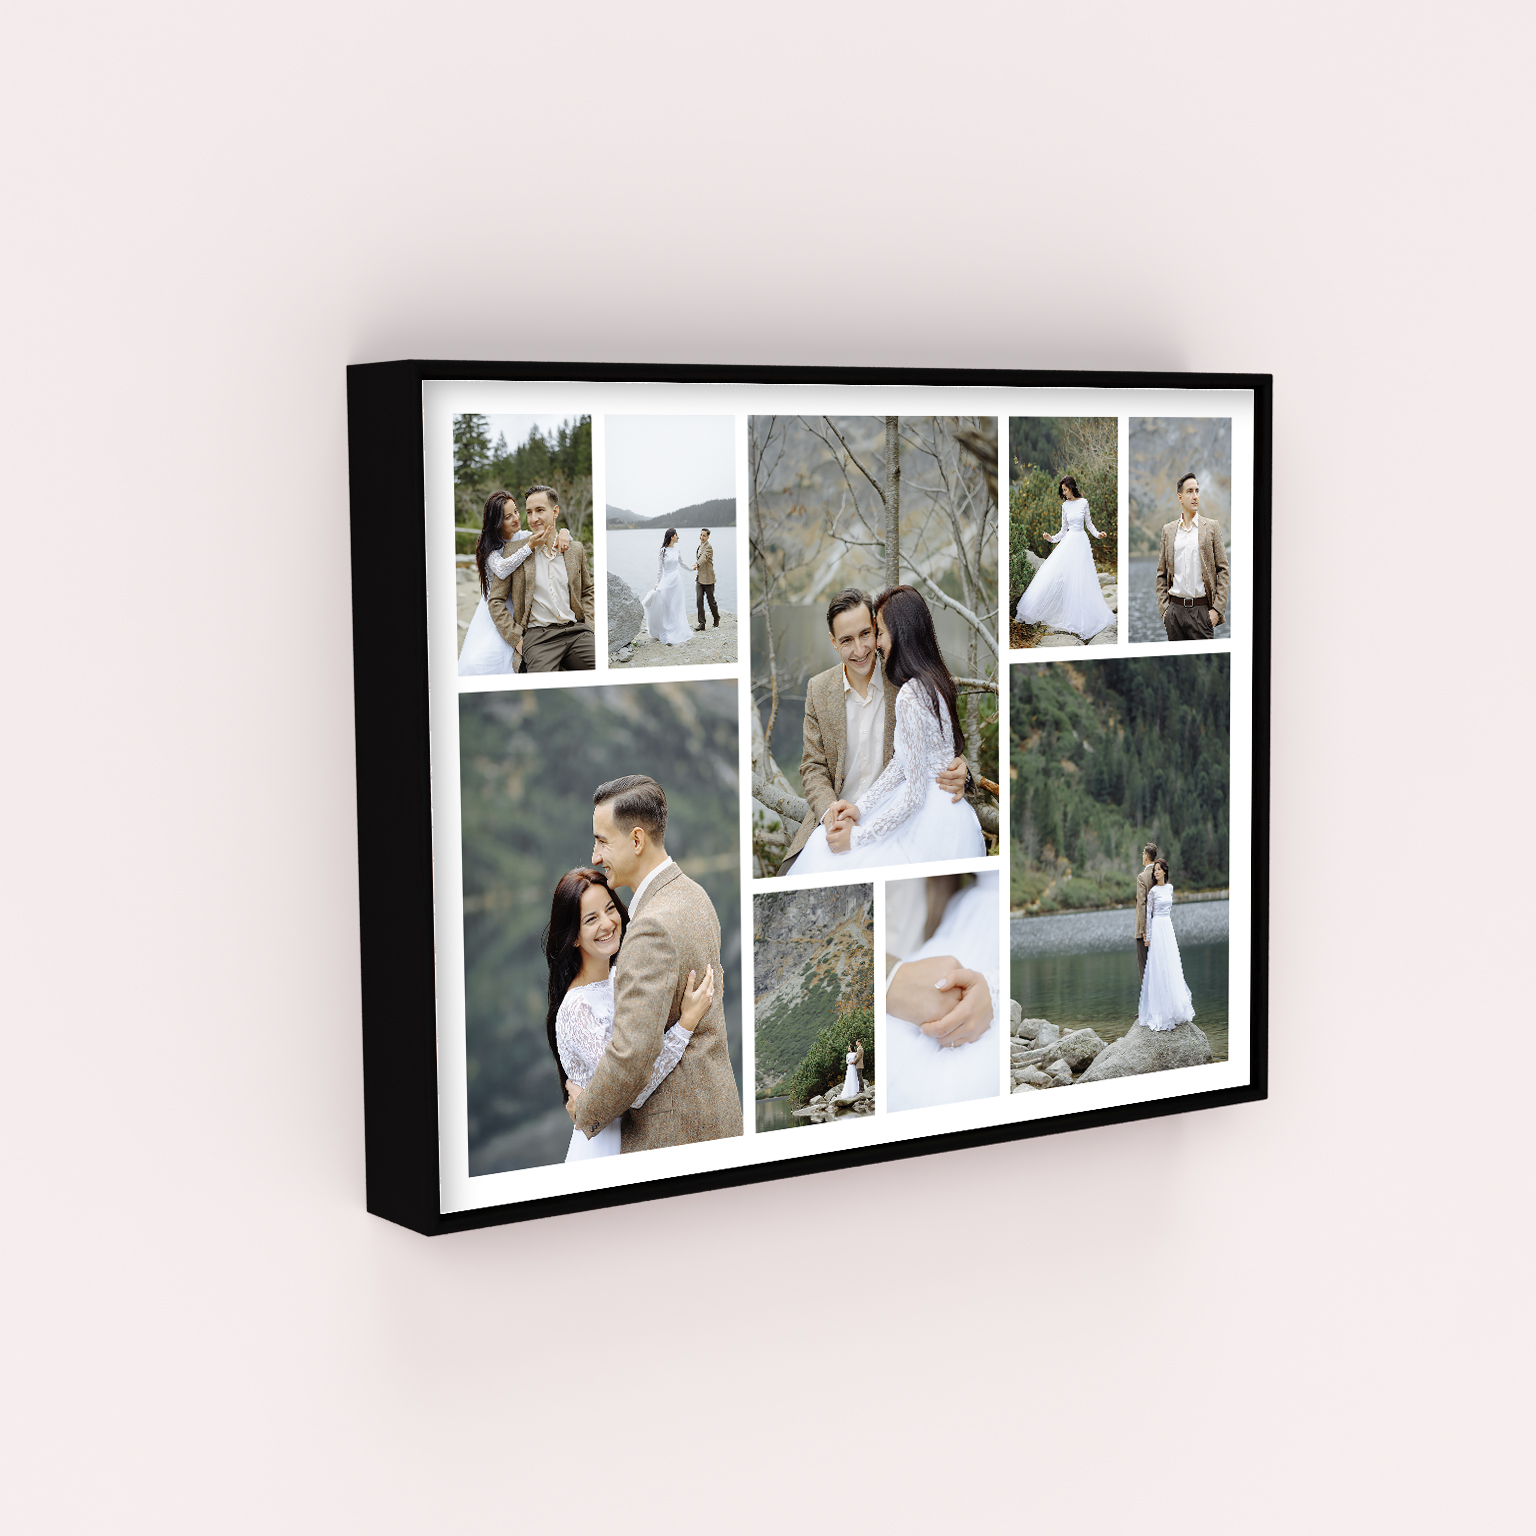 Deep Frame Photo Prints featuring Spread Montage design - Craft a captivating visual journey with this heartfelt framed print